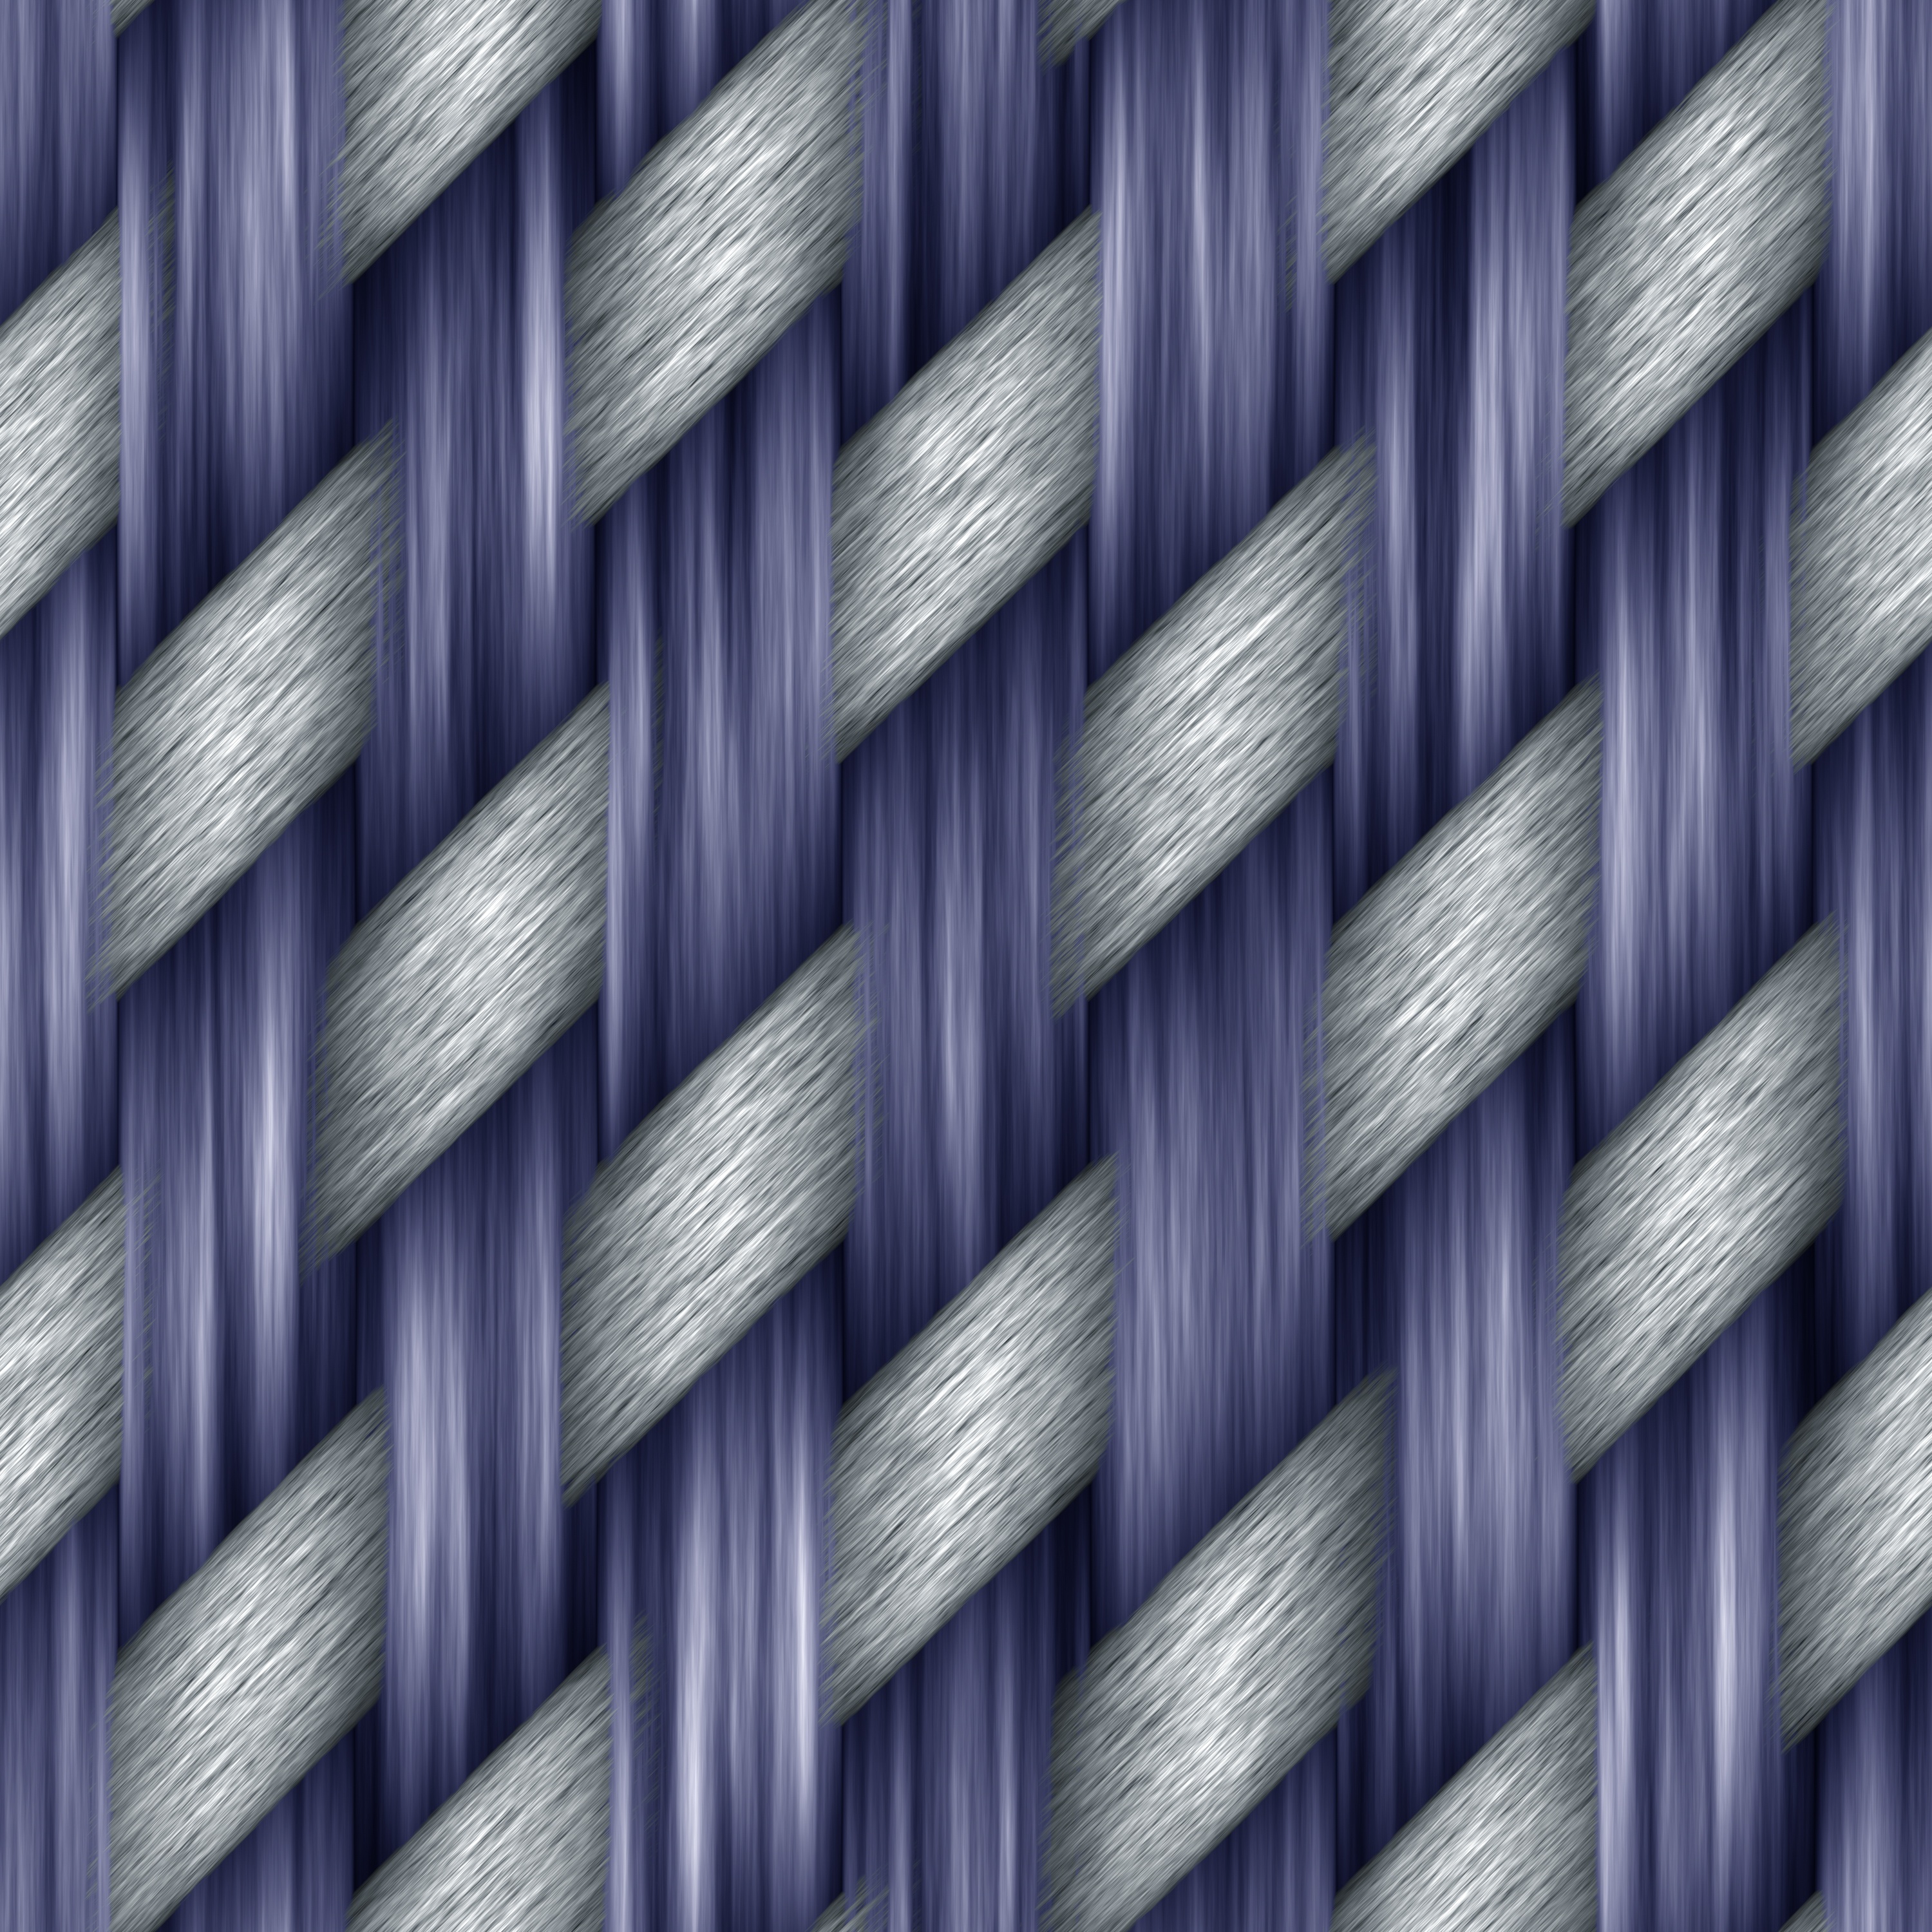 textures, lines, vertical, lilac, texture, grey, weave, wicker, braided